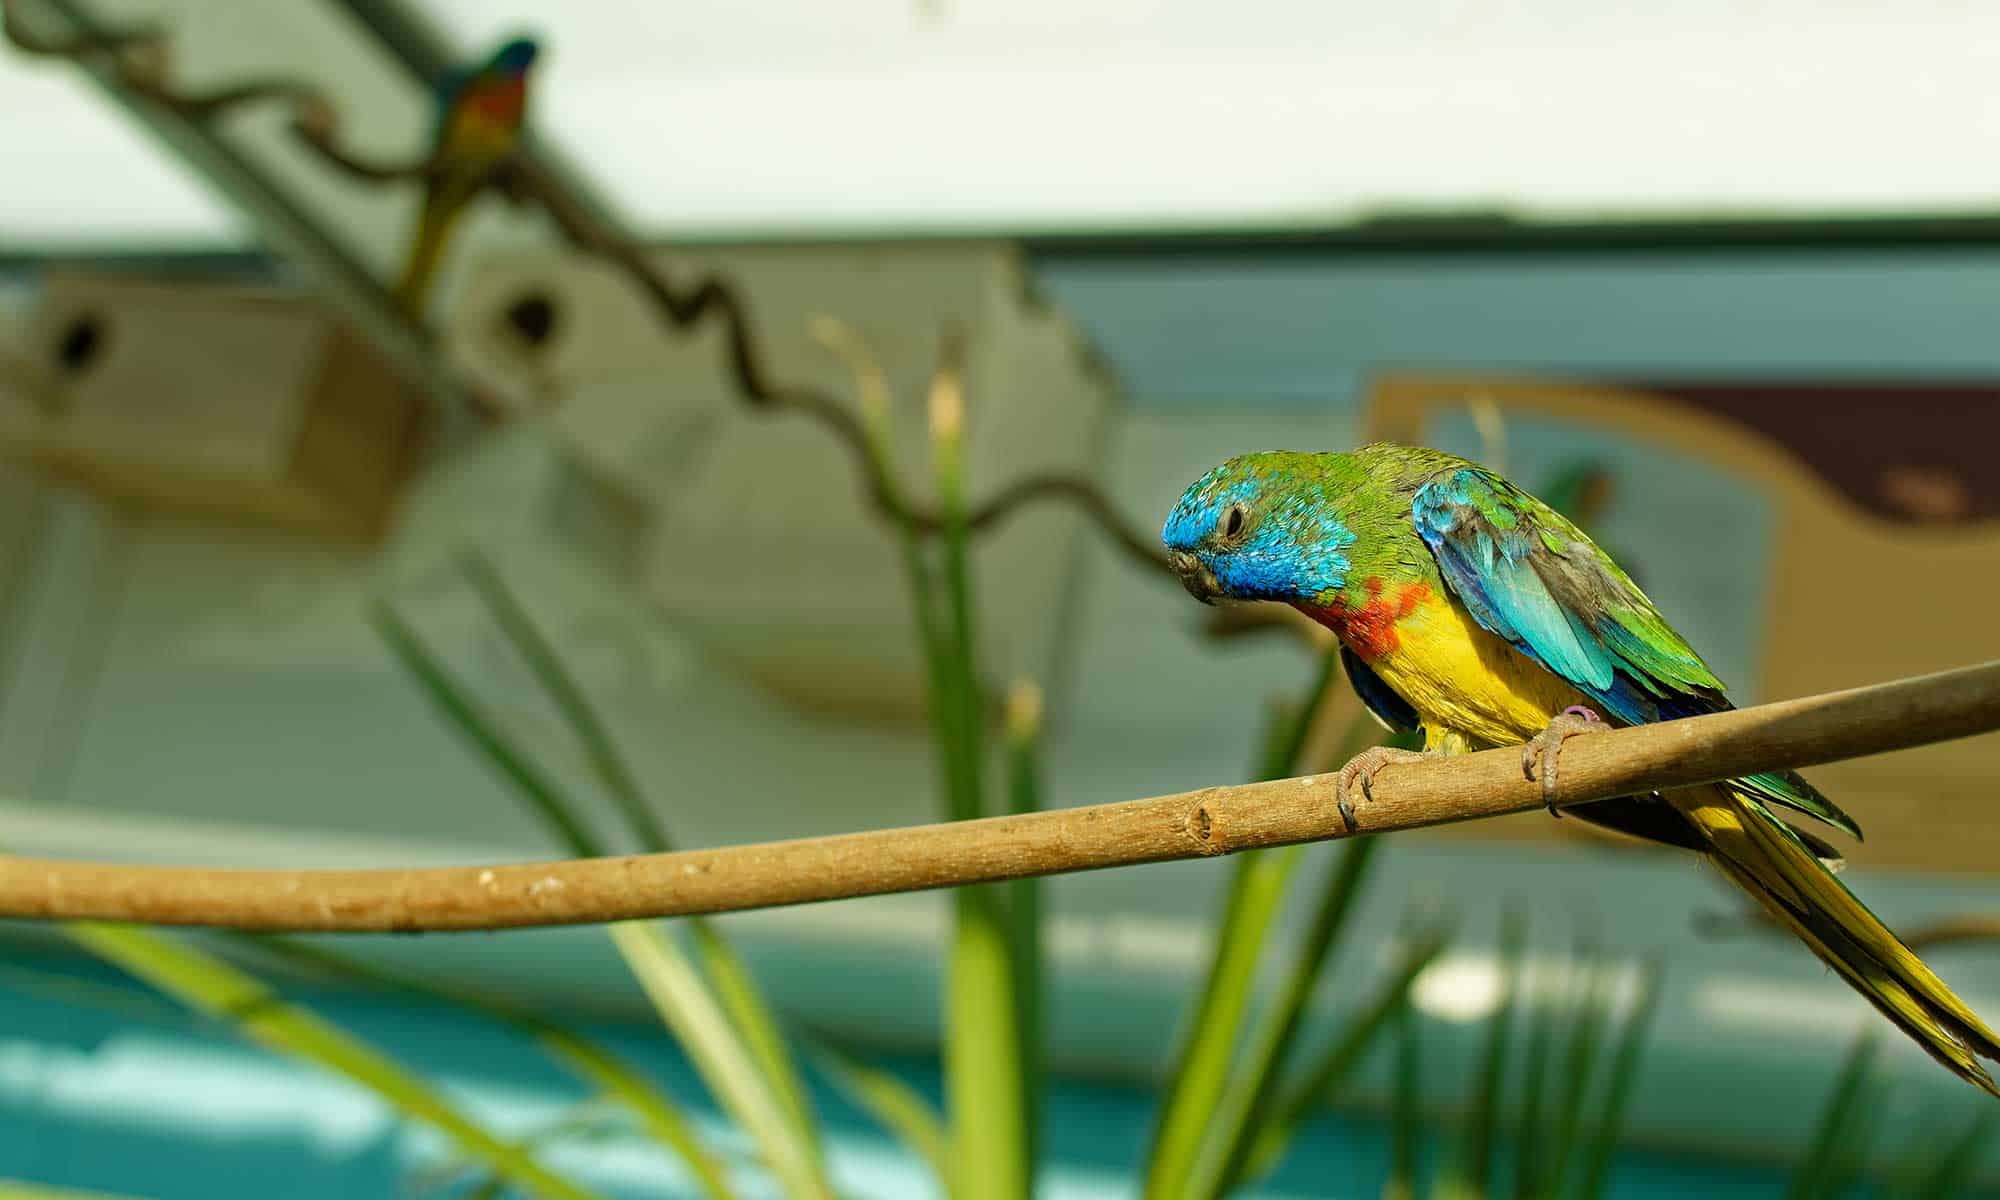 A parrot sitting on a branch